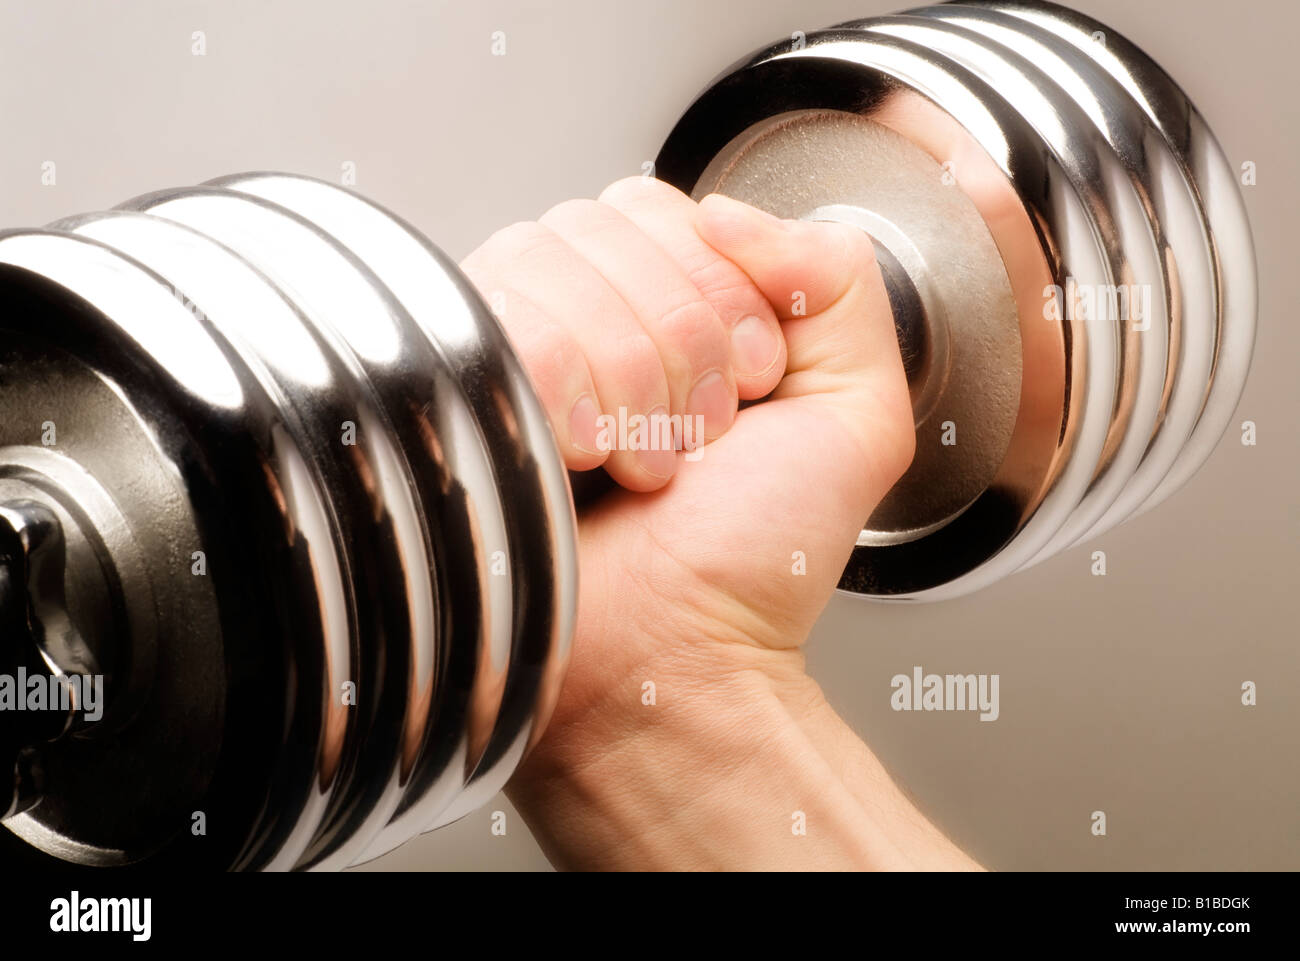 Lifting weights Stock Photo